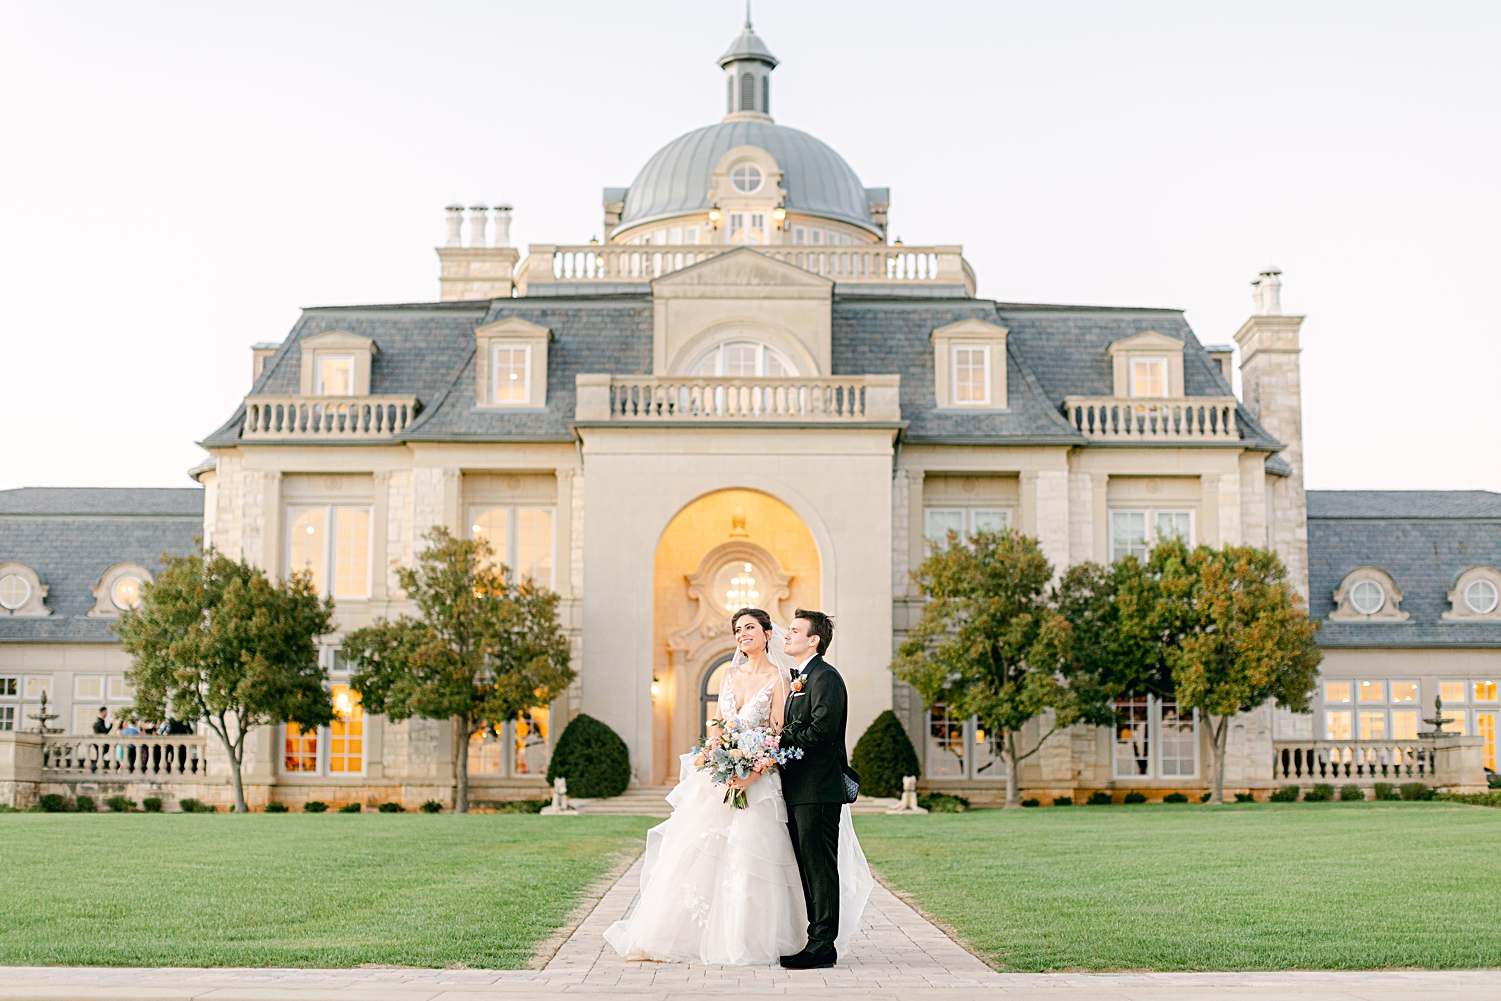 Bride and groom standing in front of mansion at french estate wedding at sunset